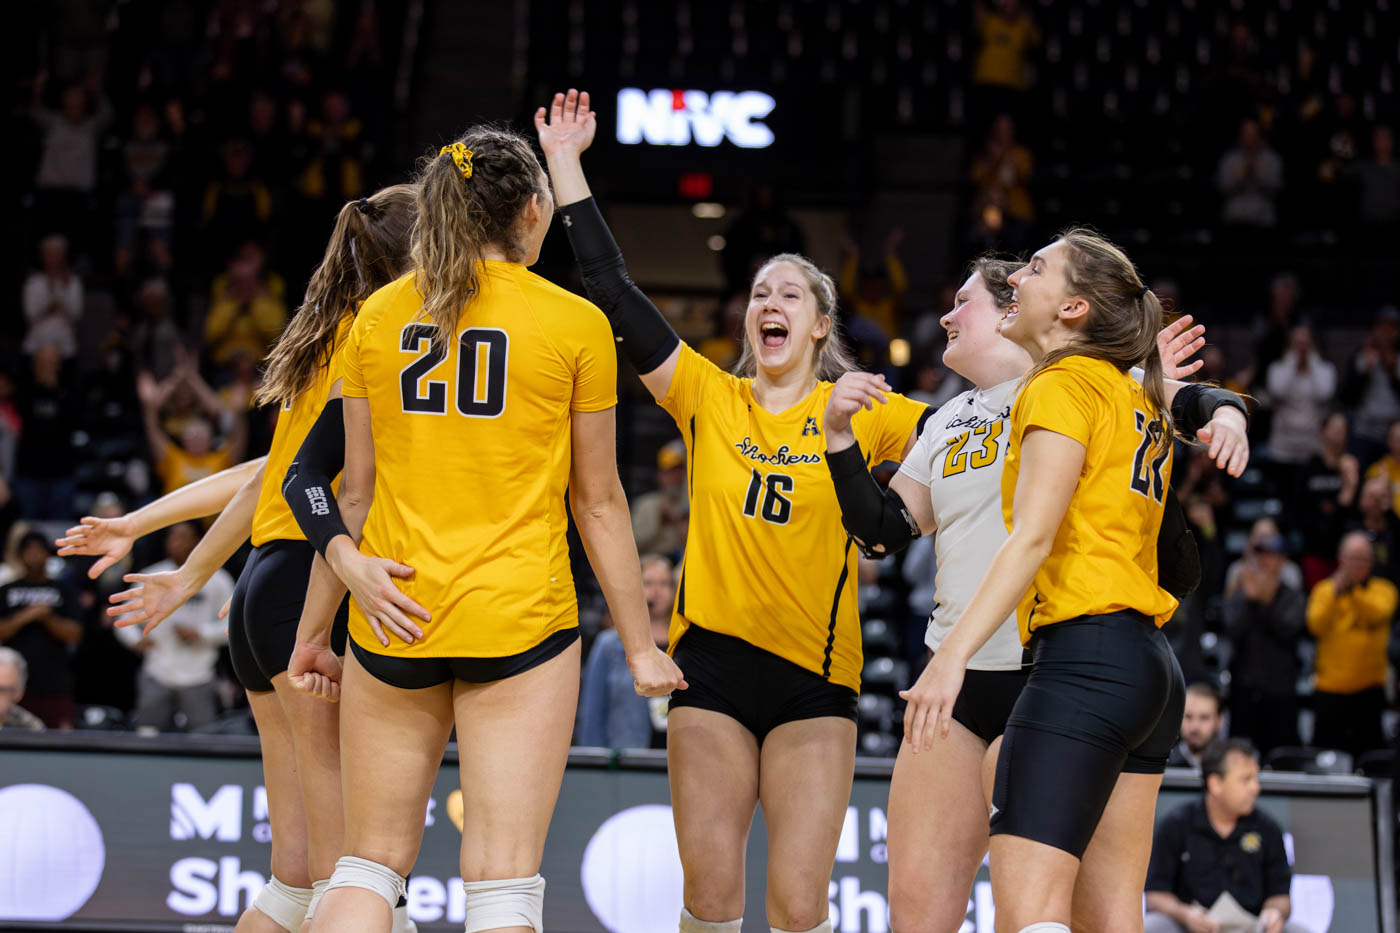 The Wichita State Shockers celebrate their win in the NIVC semi-finals match against Montana State. Following the win, the Shockers will face UTEP on Dec. 12 for the championship.